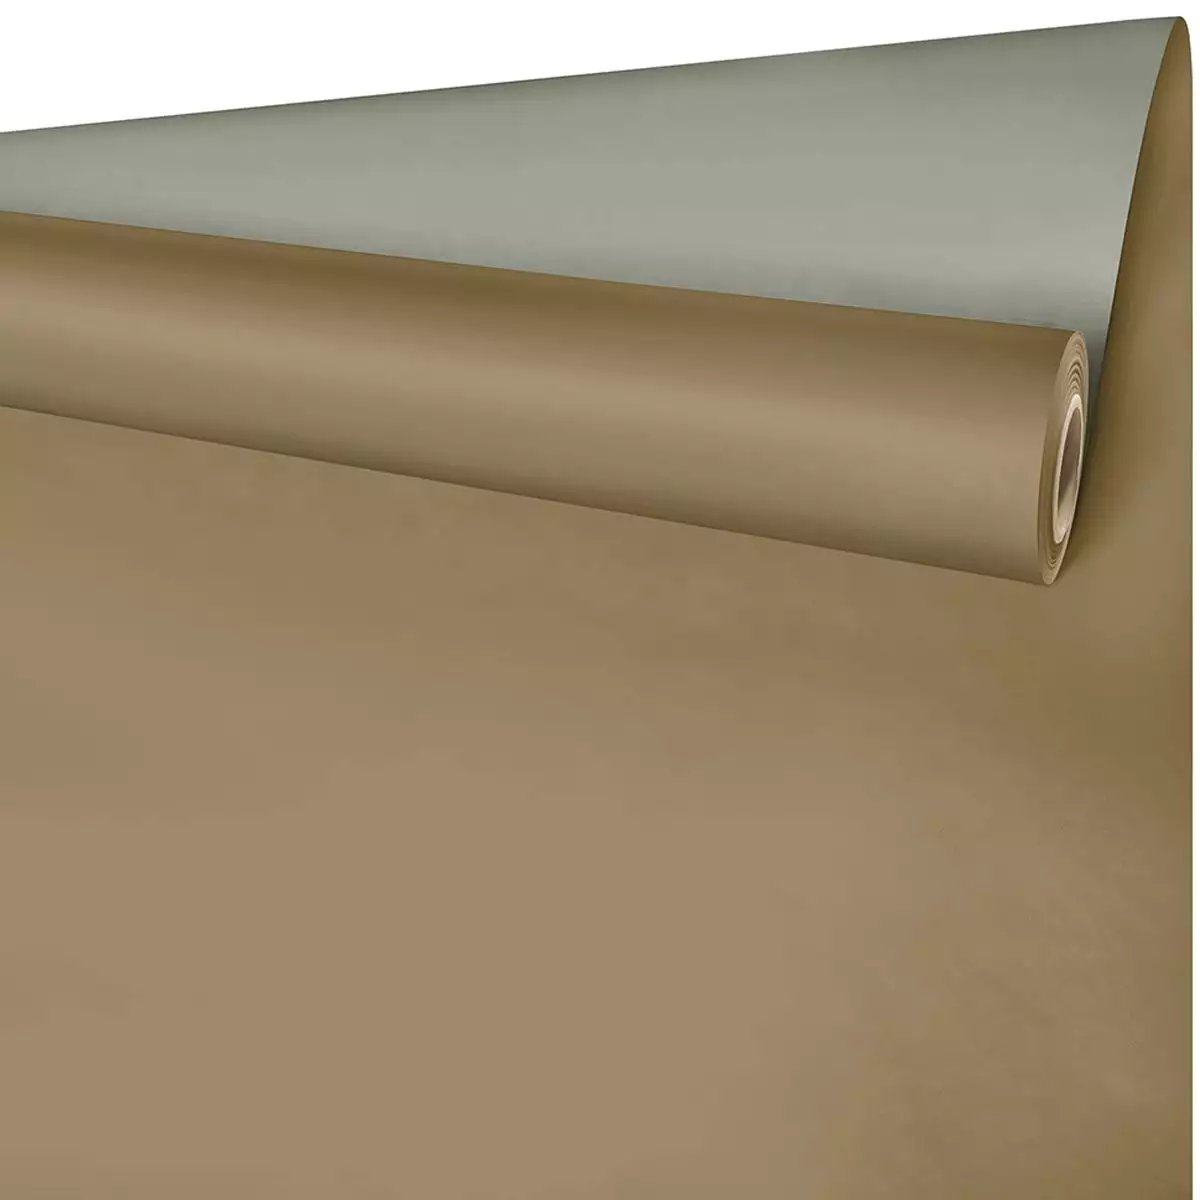 DUO PLAIN SMOOTH OFFSET PAPER ROLL 0.79X50 M MARRON